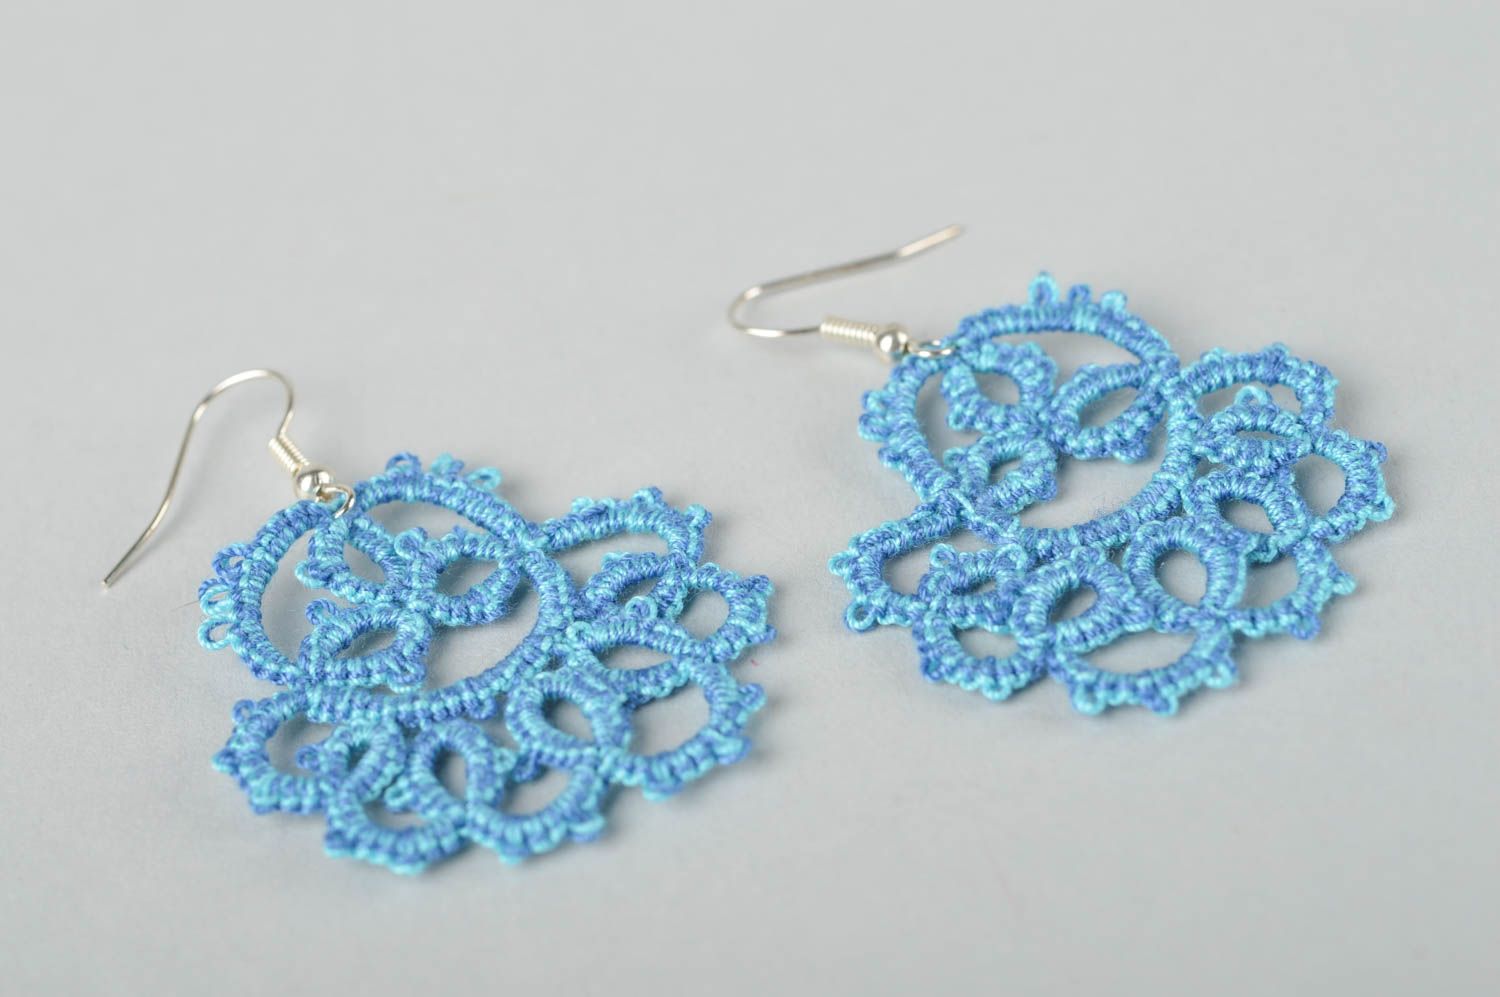 Stylish handmade woven thread earrings textile jewelry designs gifts for her photo 2